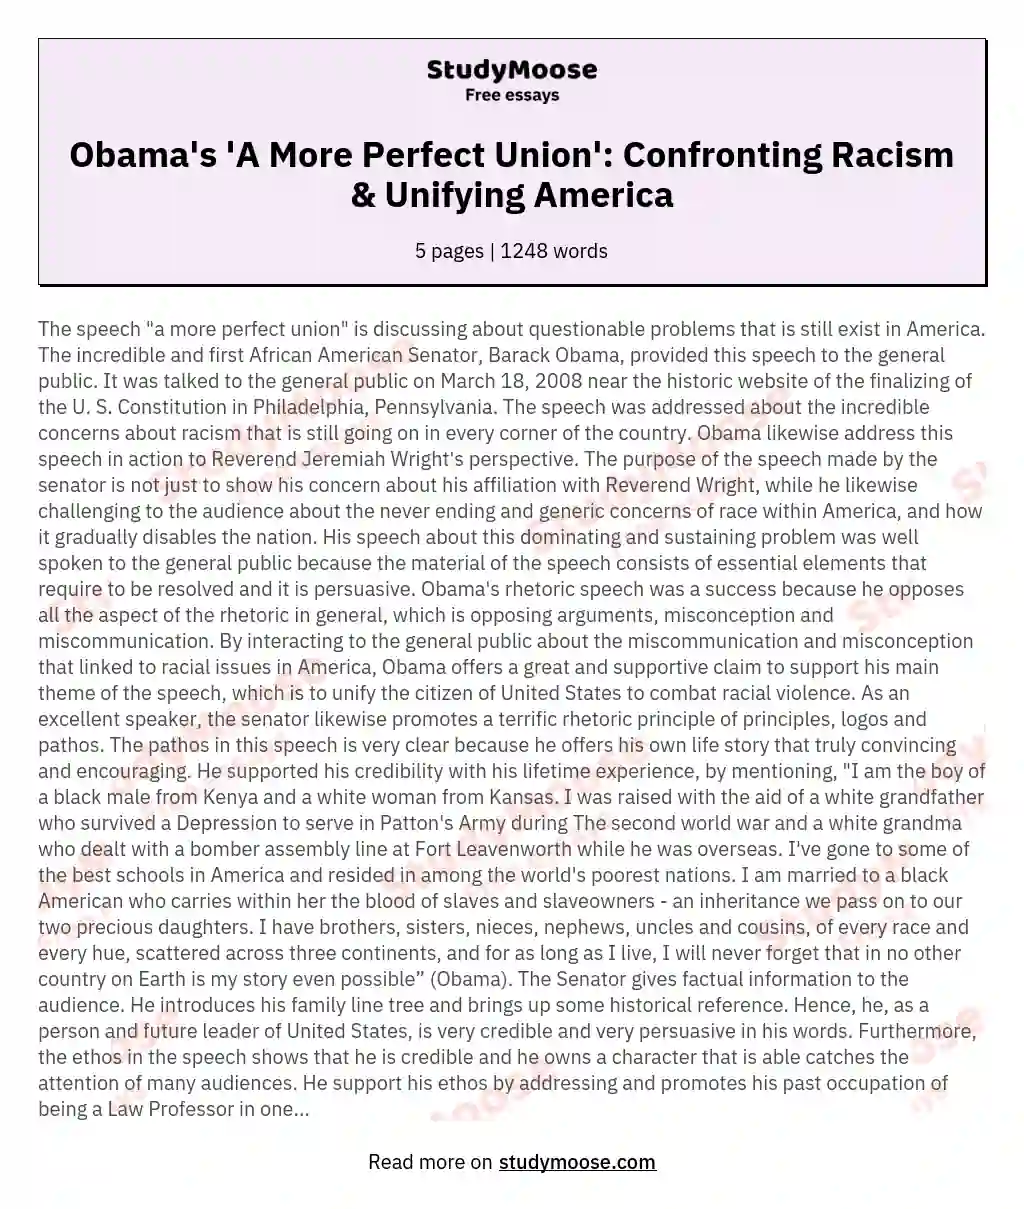 Obama's 'A More Perfect Union': Confronting Racism & Unifying America essay